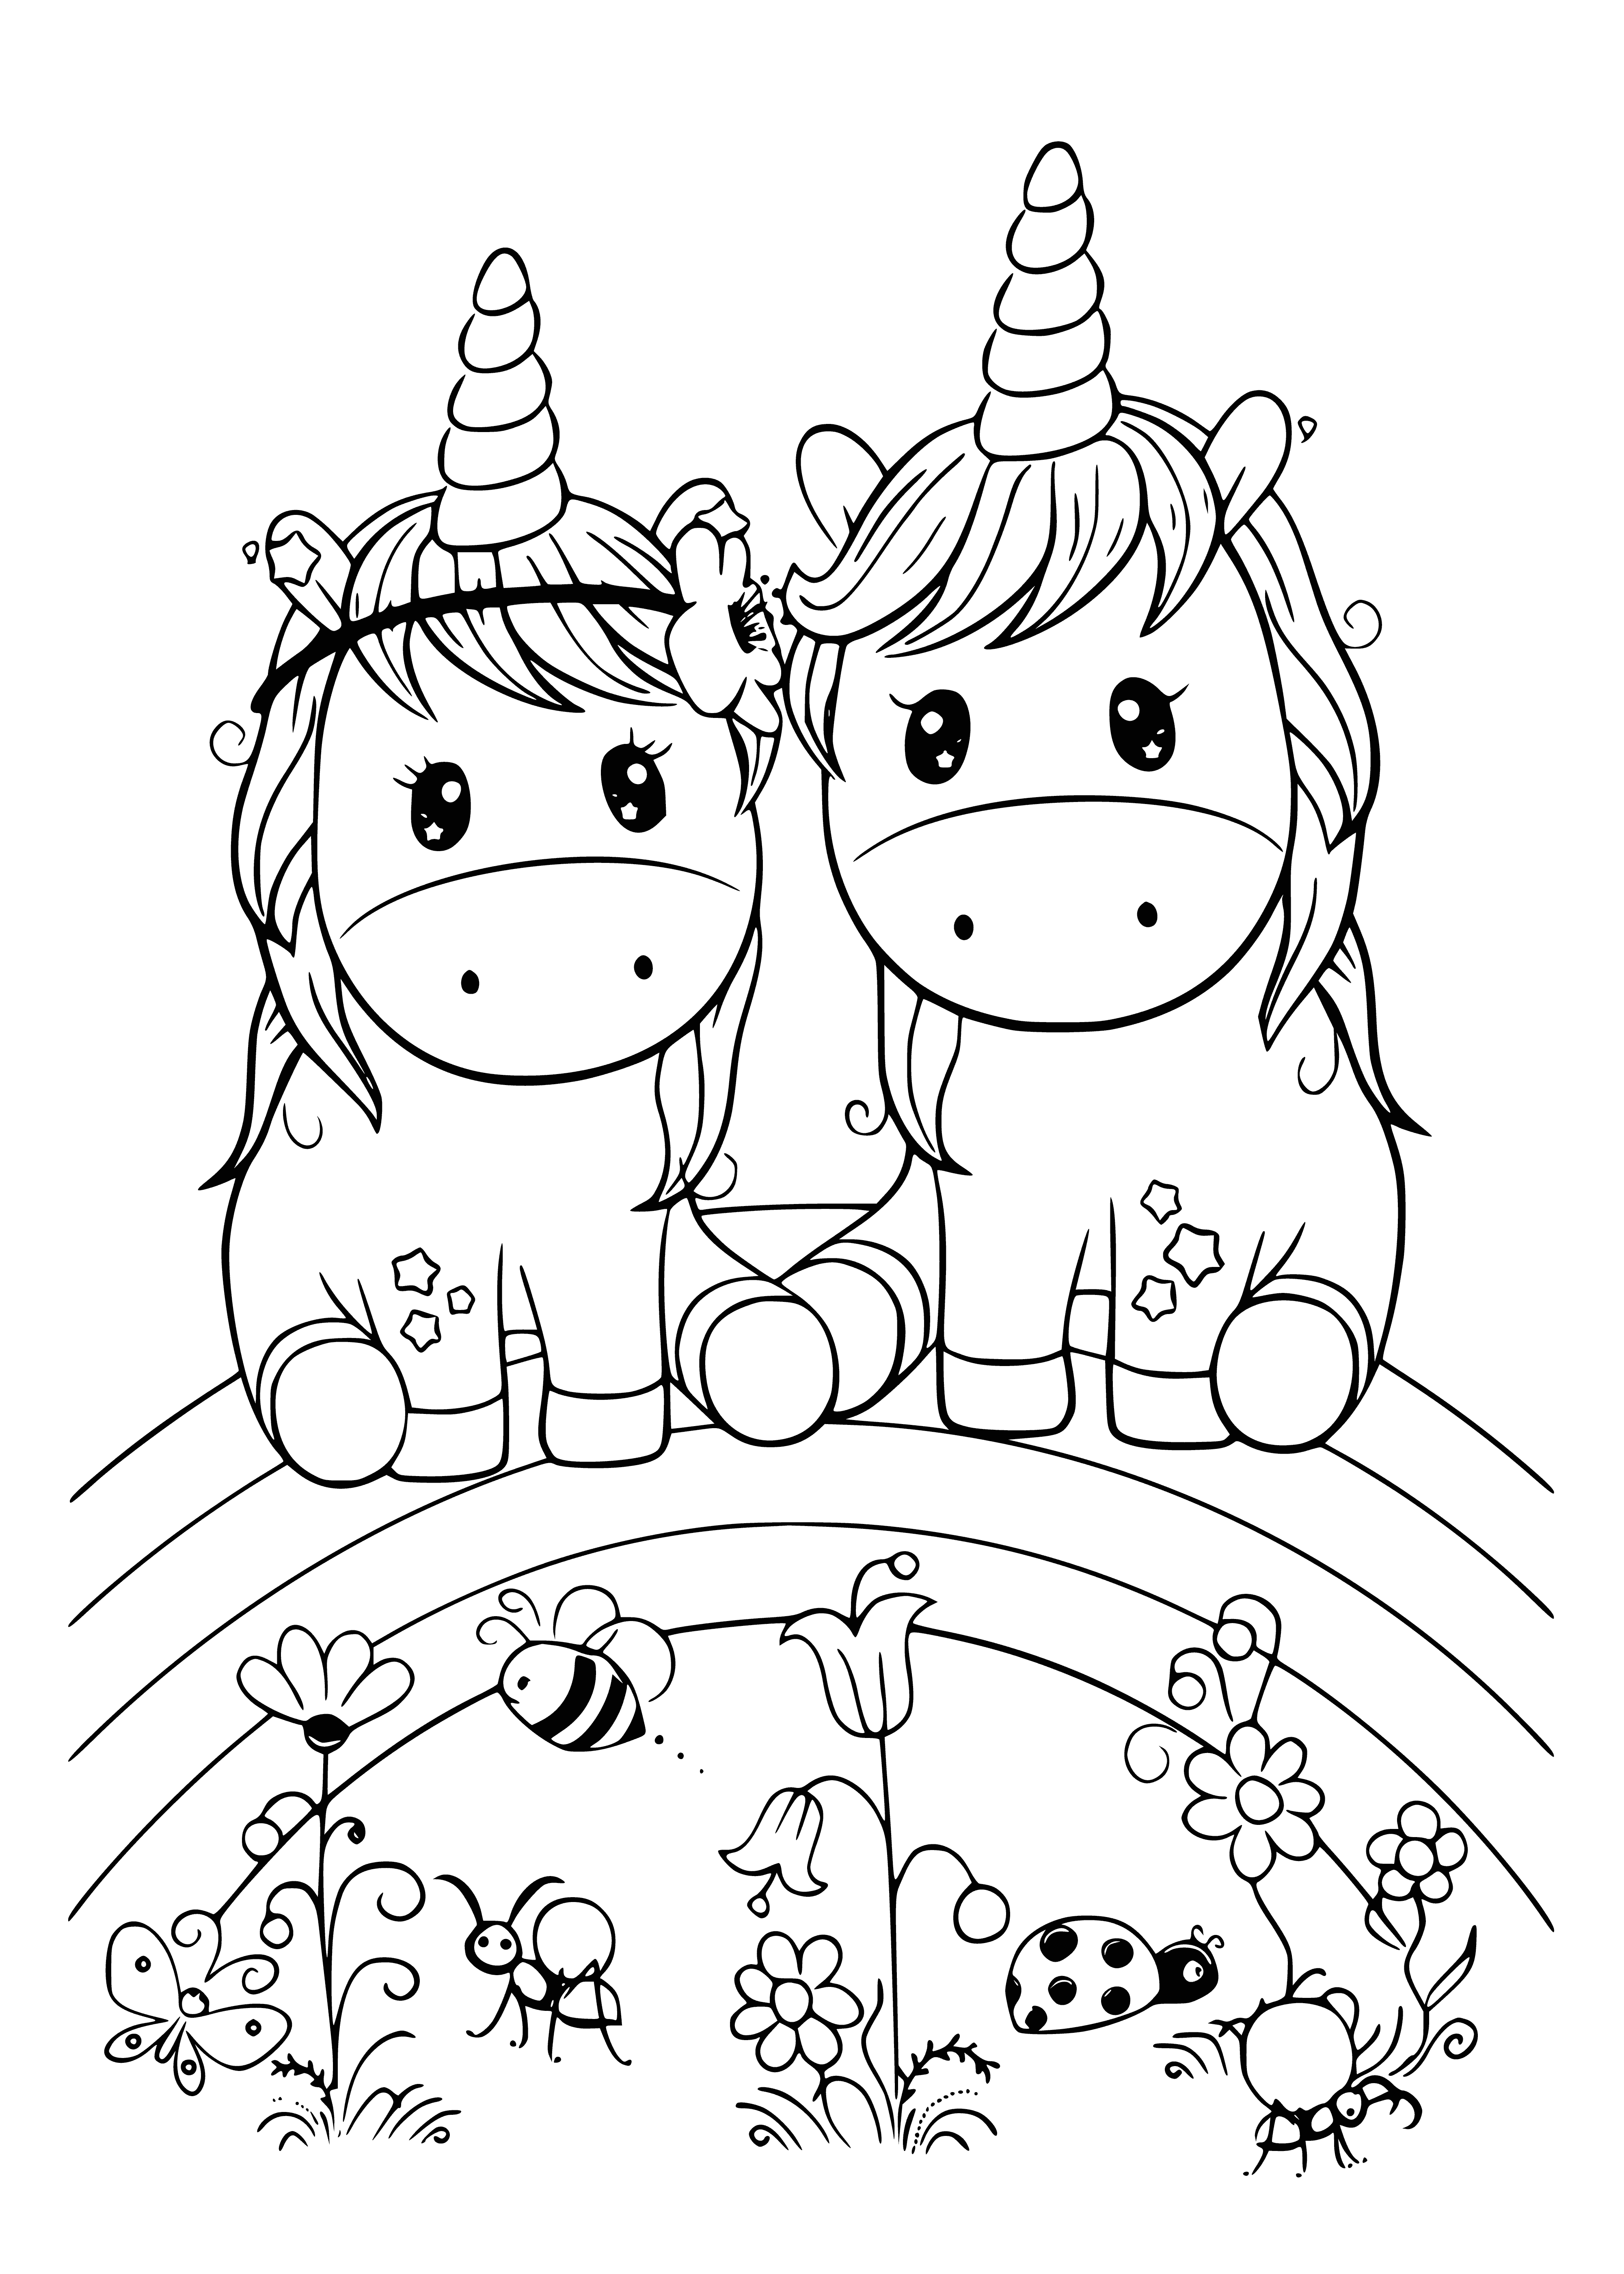 coloring page: Unicorns frolic on a colorful rainbow in a scene of peaceful fun and innocence. Unique creatures with glimmering manes and tails stand, play, and leap. A glittering sun sets behind a mountain range of blues, greens, and purples.